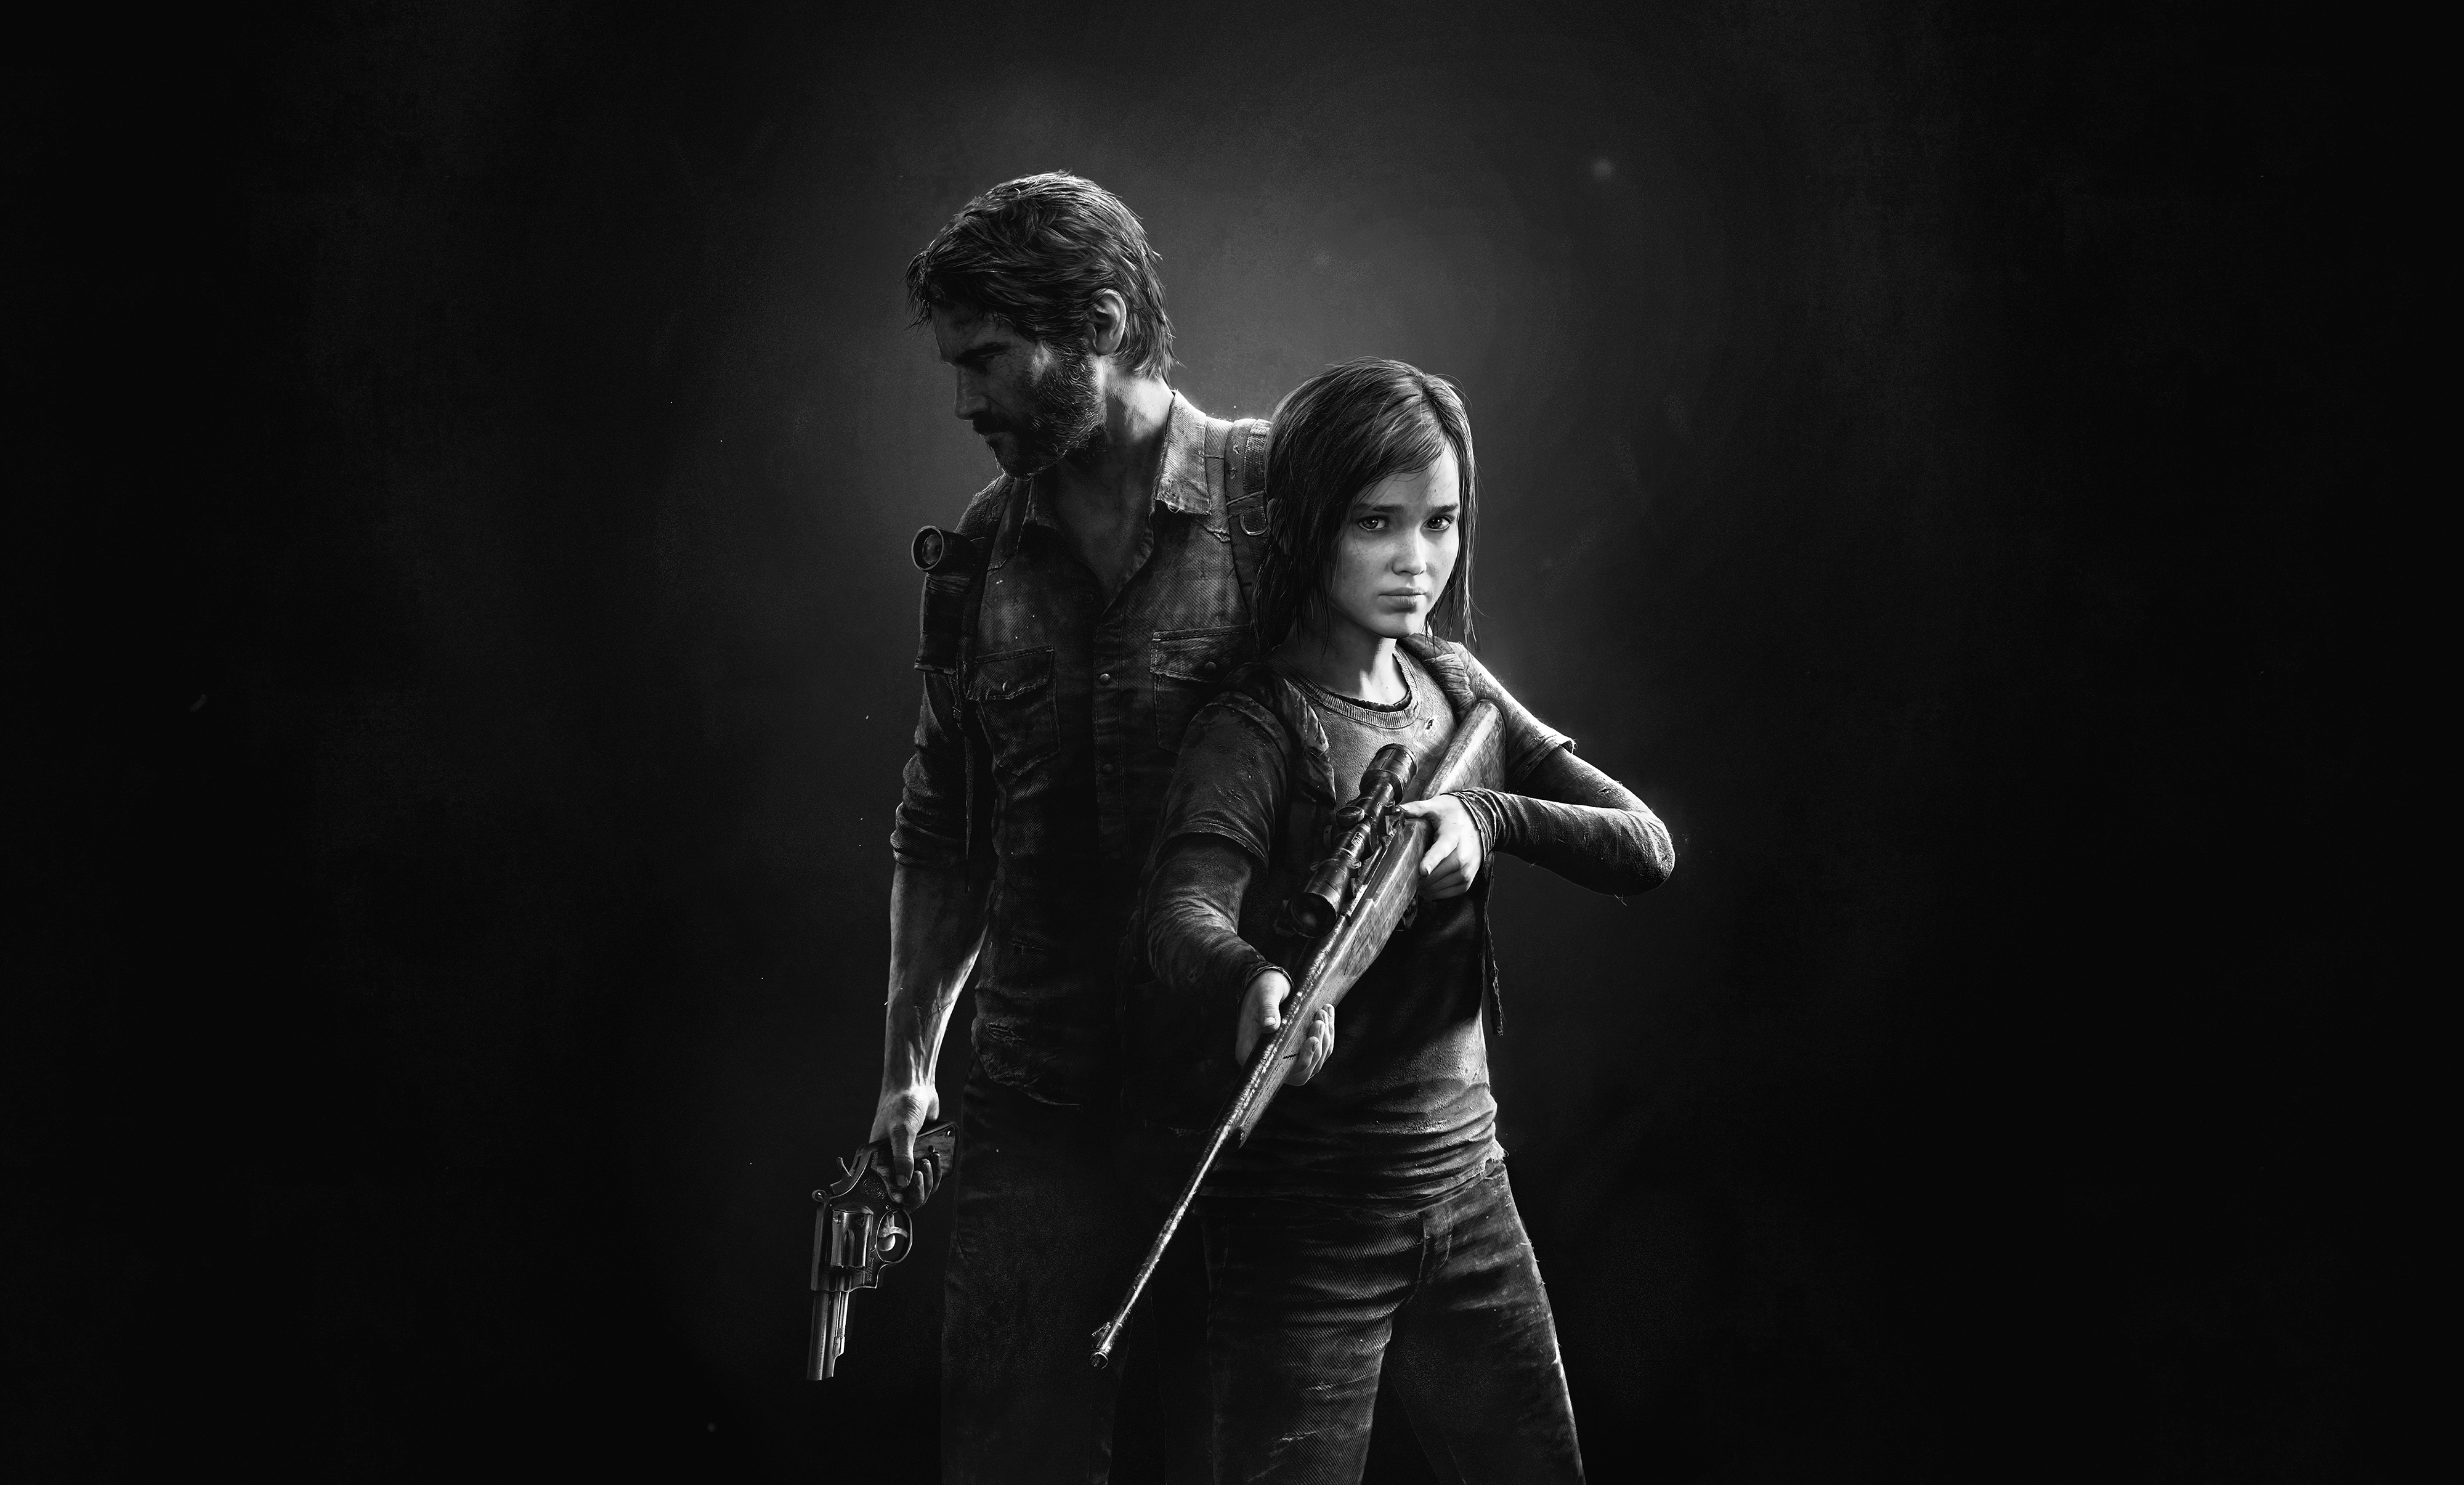 She to live there last year. The last of us. Джоэл the last of us. Джоэл the last of us 1.